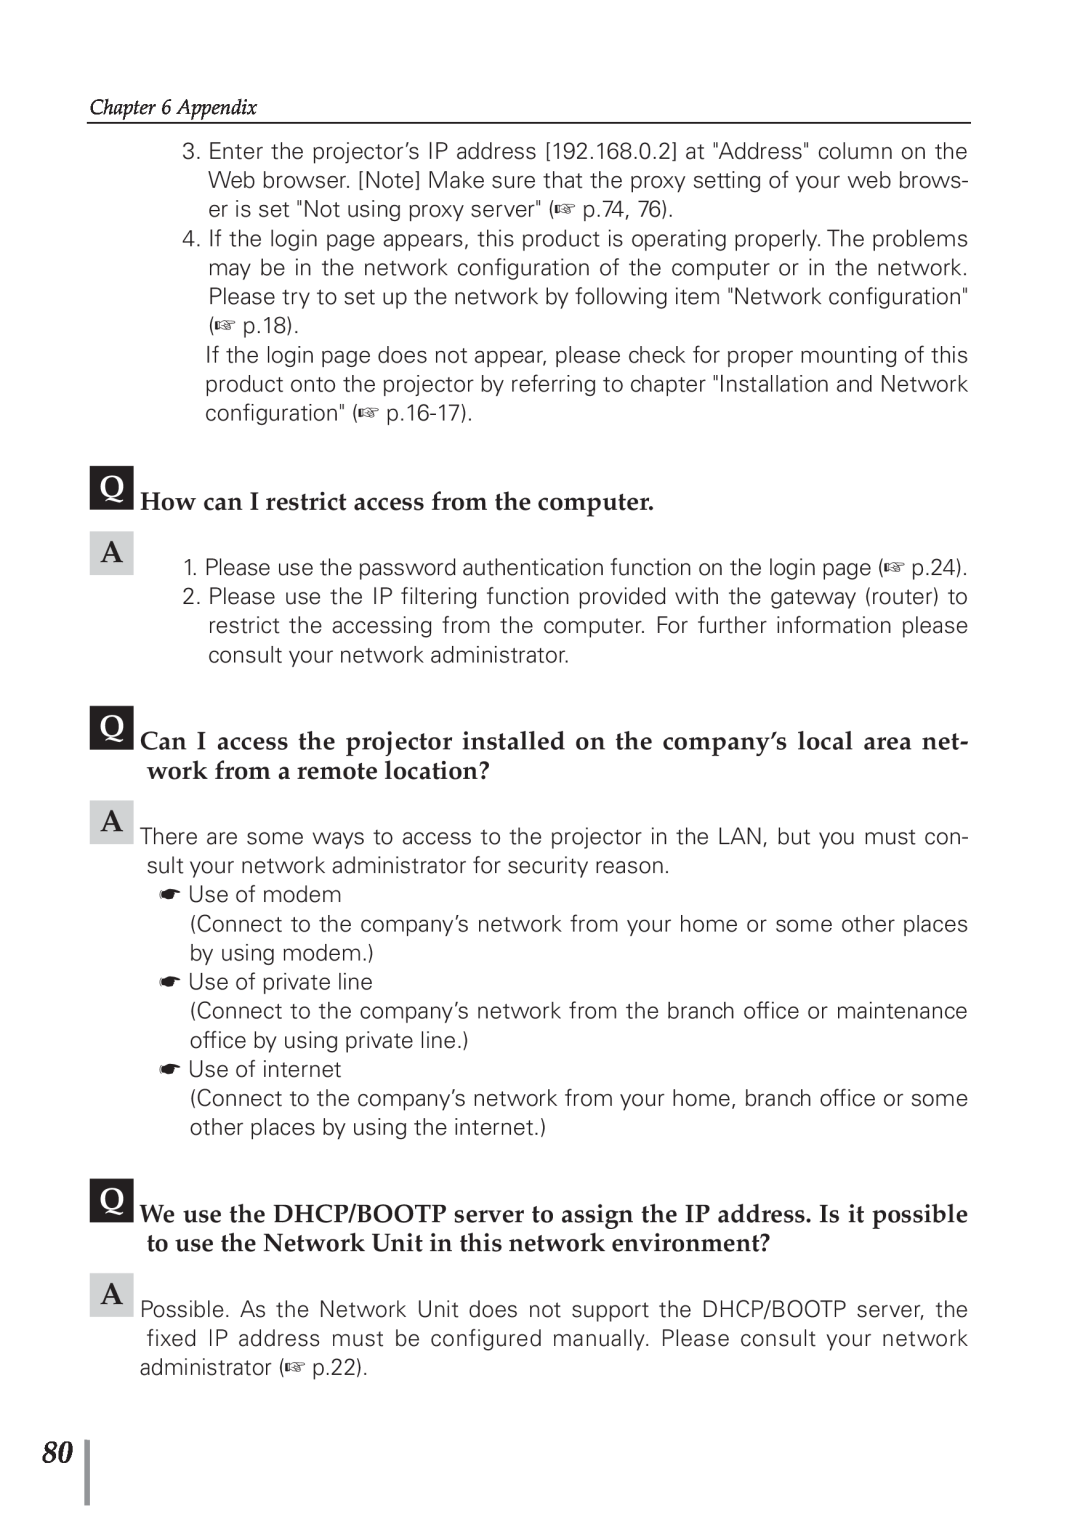 Eiki PJNET-300 owner manual Q How can I restrict access from the computer 